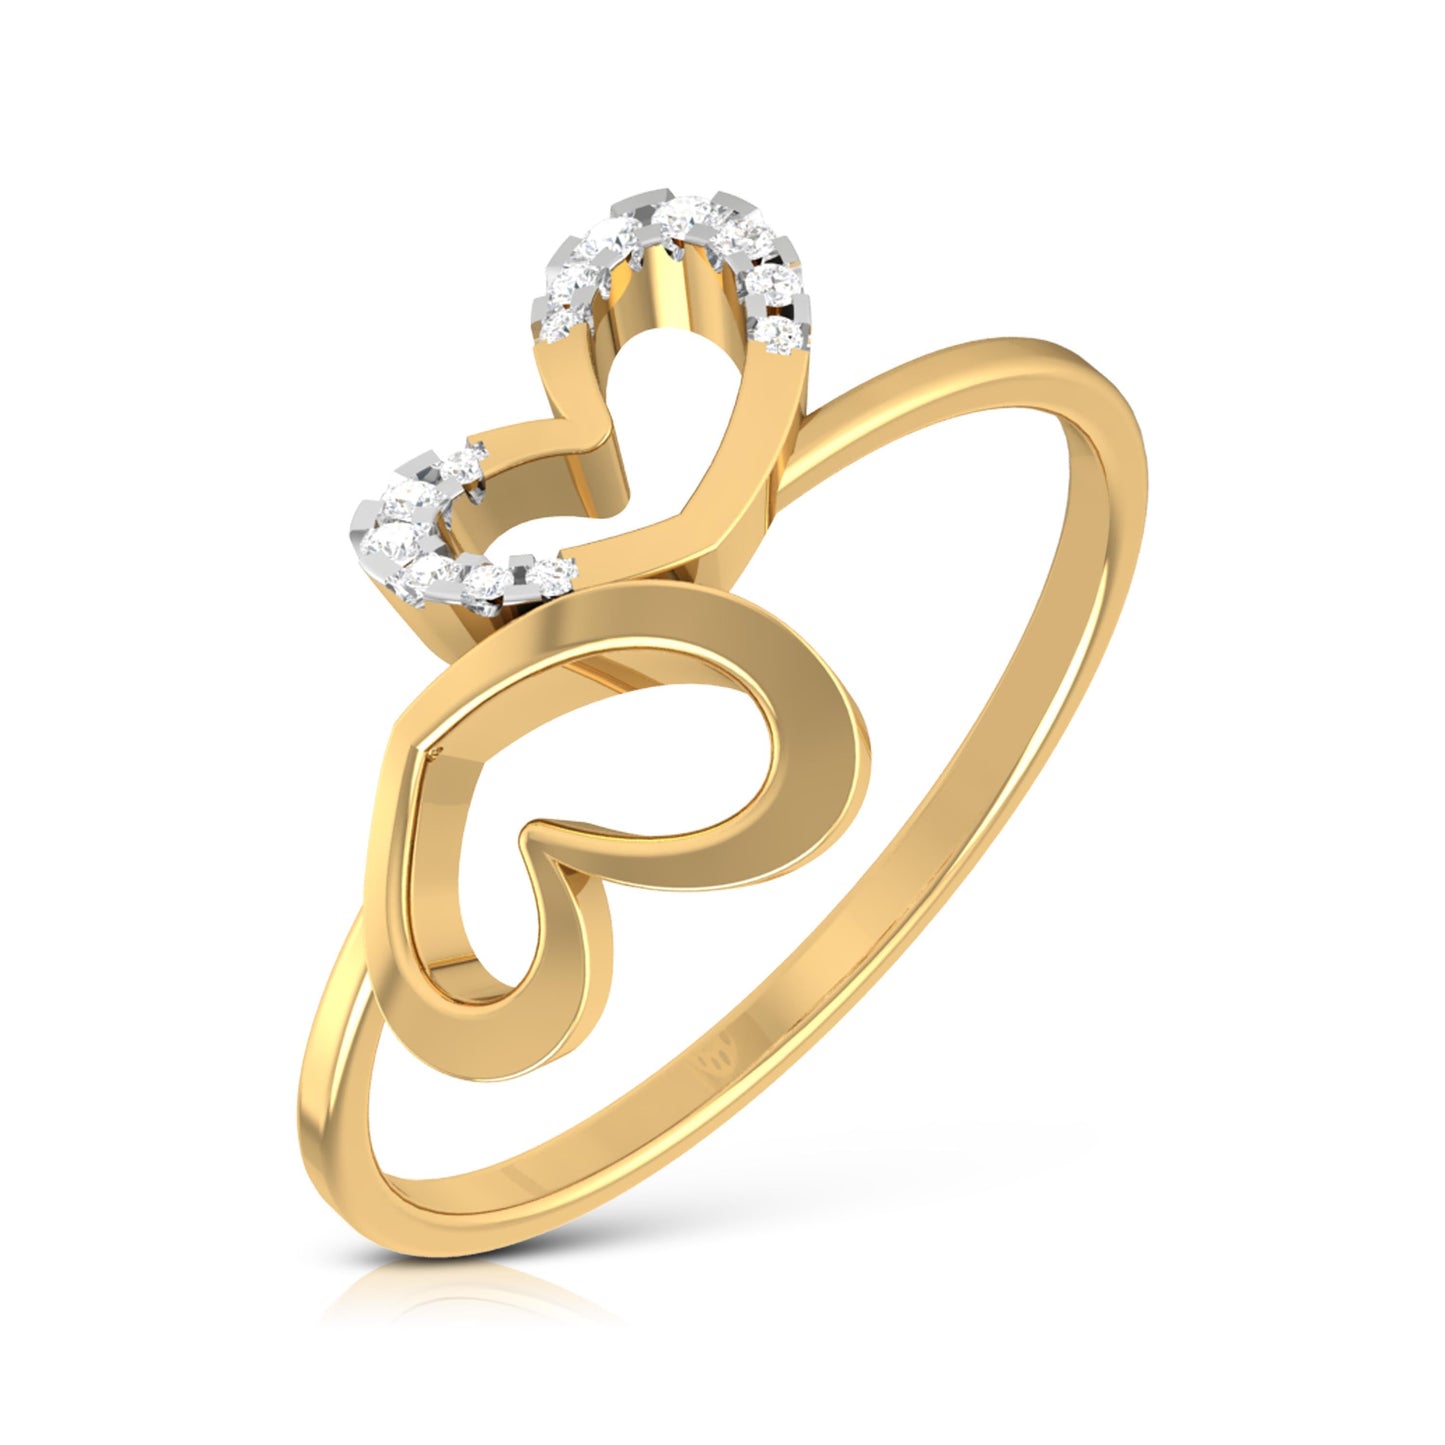 Romantic Heart Ring in Solid Gold - Tales In Gold